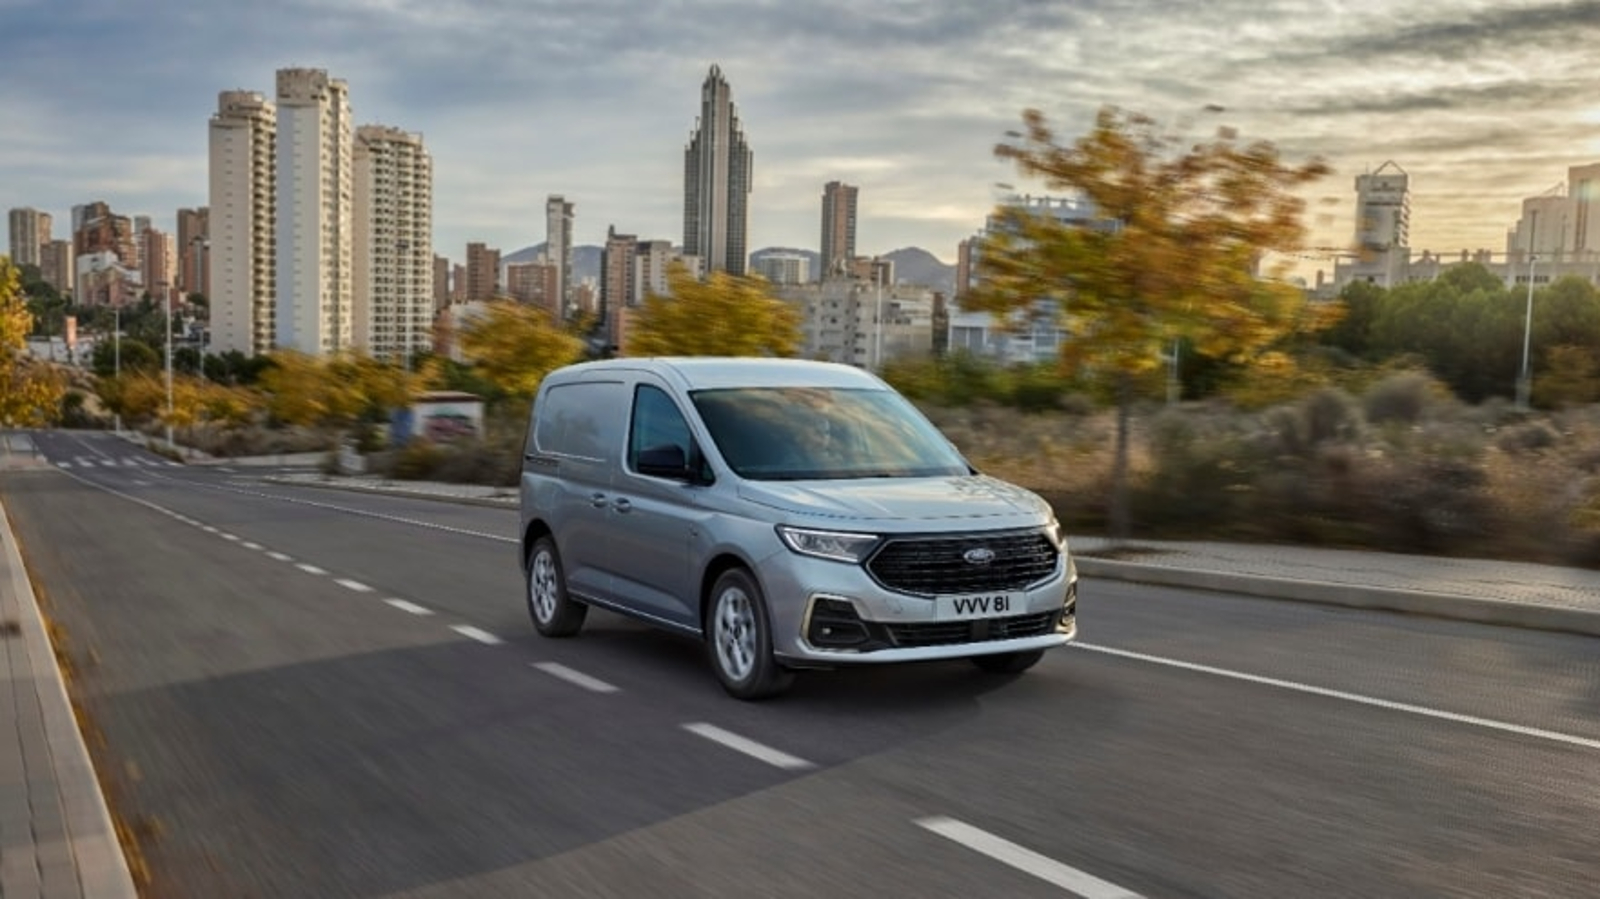 Ford Transit Connect PHEV Coming To Europe This Year - CleanTechnica